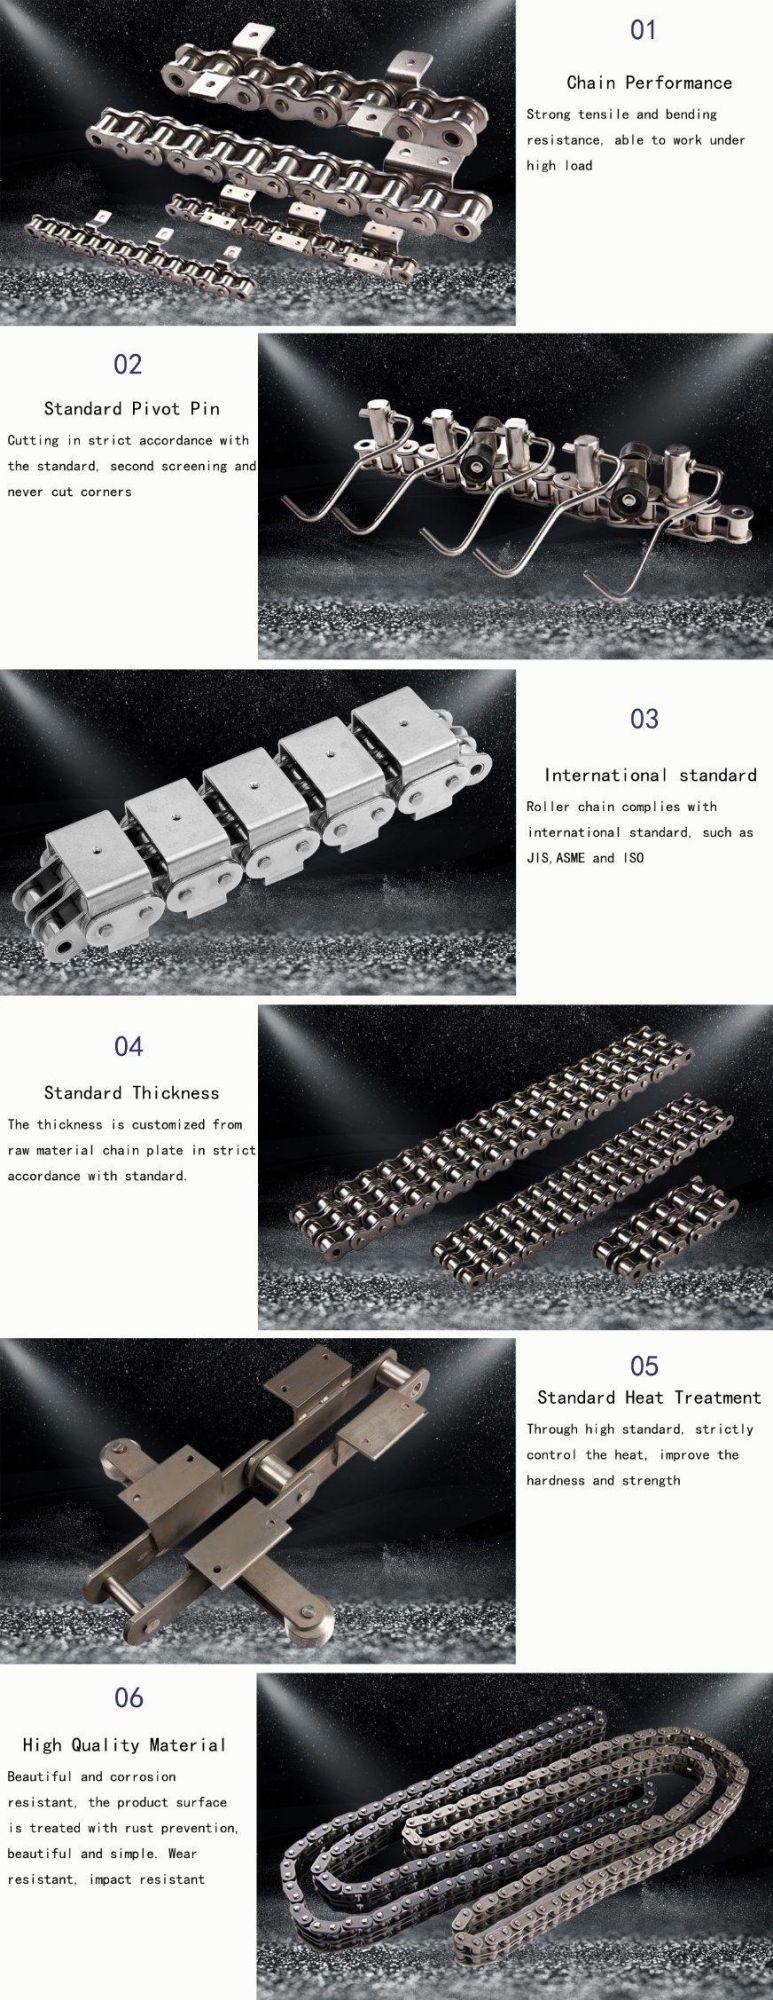 Wsa1 & Wsa2 & Wsk1 & Wsk2 Stainless Steel Short Pitch Industrial Conveyor Roller Chain with Attachments